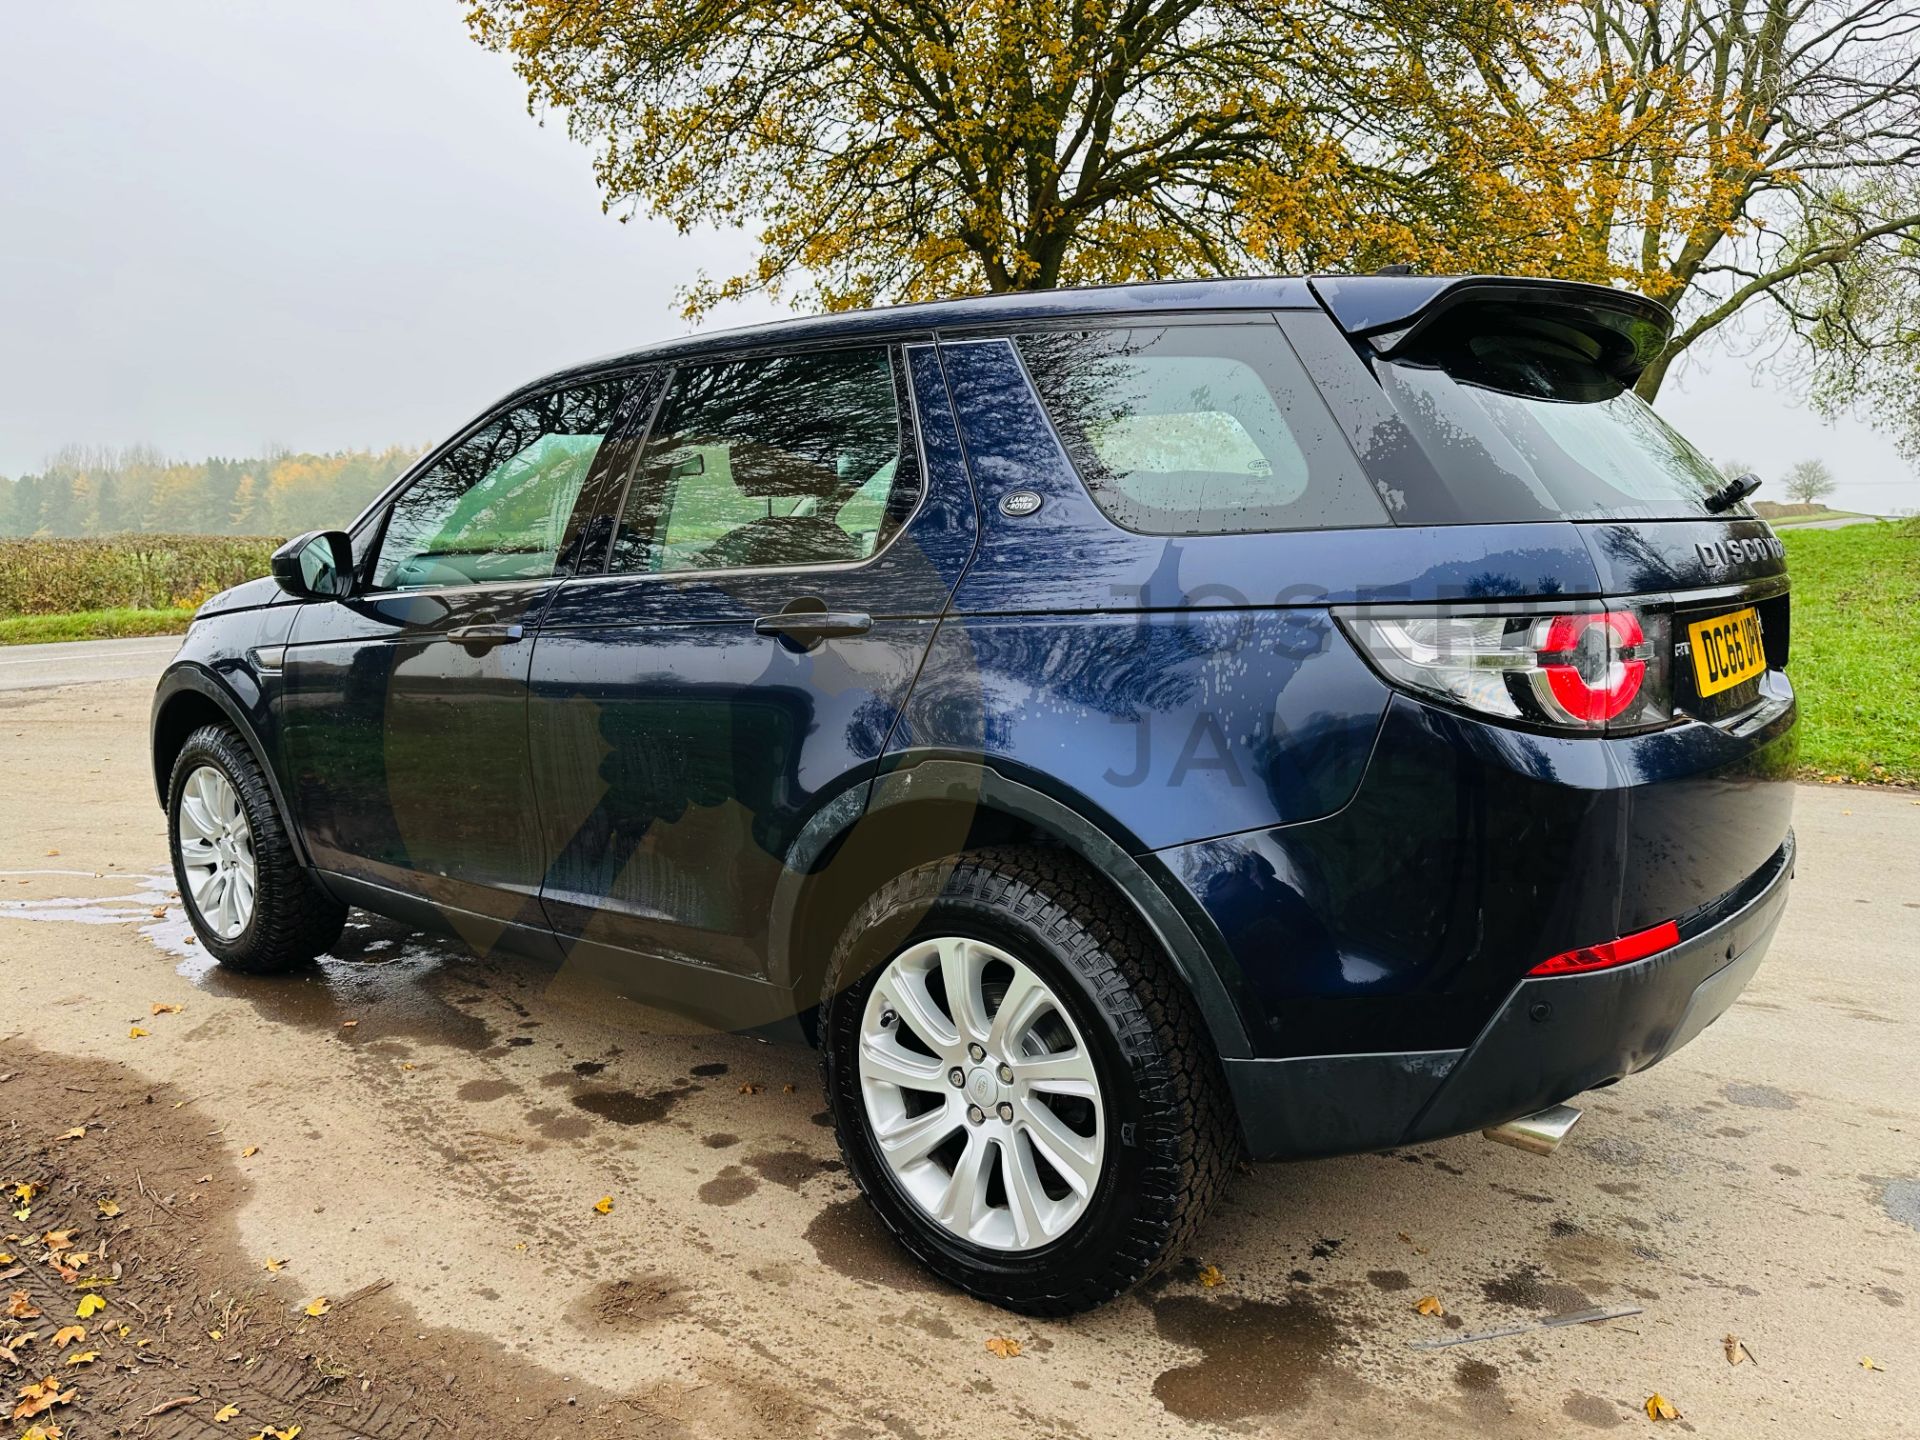 (ON SALE) LAND ROVER DISCOVERY SPORT *SE TECH* 2017 MODEL - FULL SERVICE HISTORY -1 OWNER - NO VAT!! - Image 10 of 43